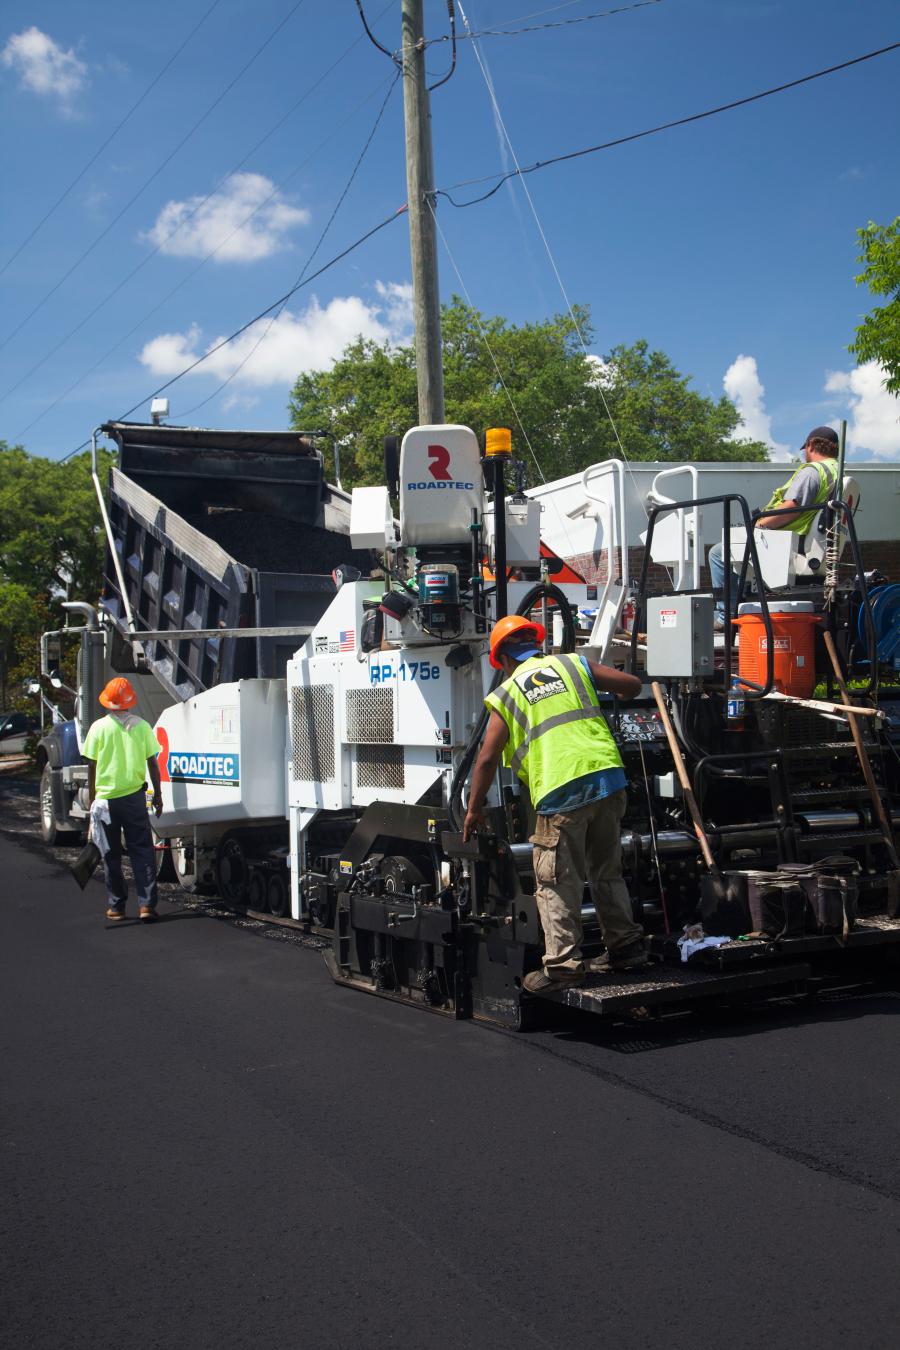 The Roadtec RP-175e is a compact 8-ft. (2.5 m) wide rubber-track asphalt paver designed to work in all types of sub-grades and paving applications.